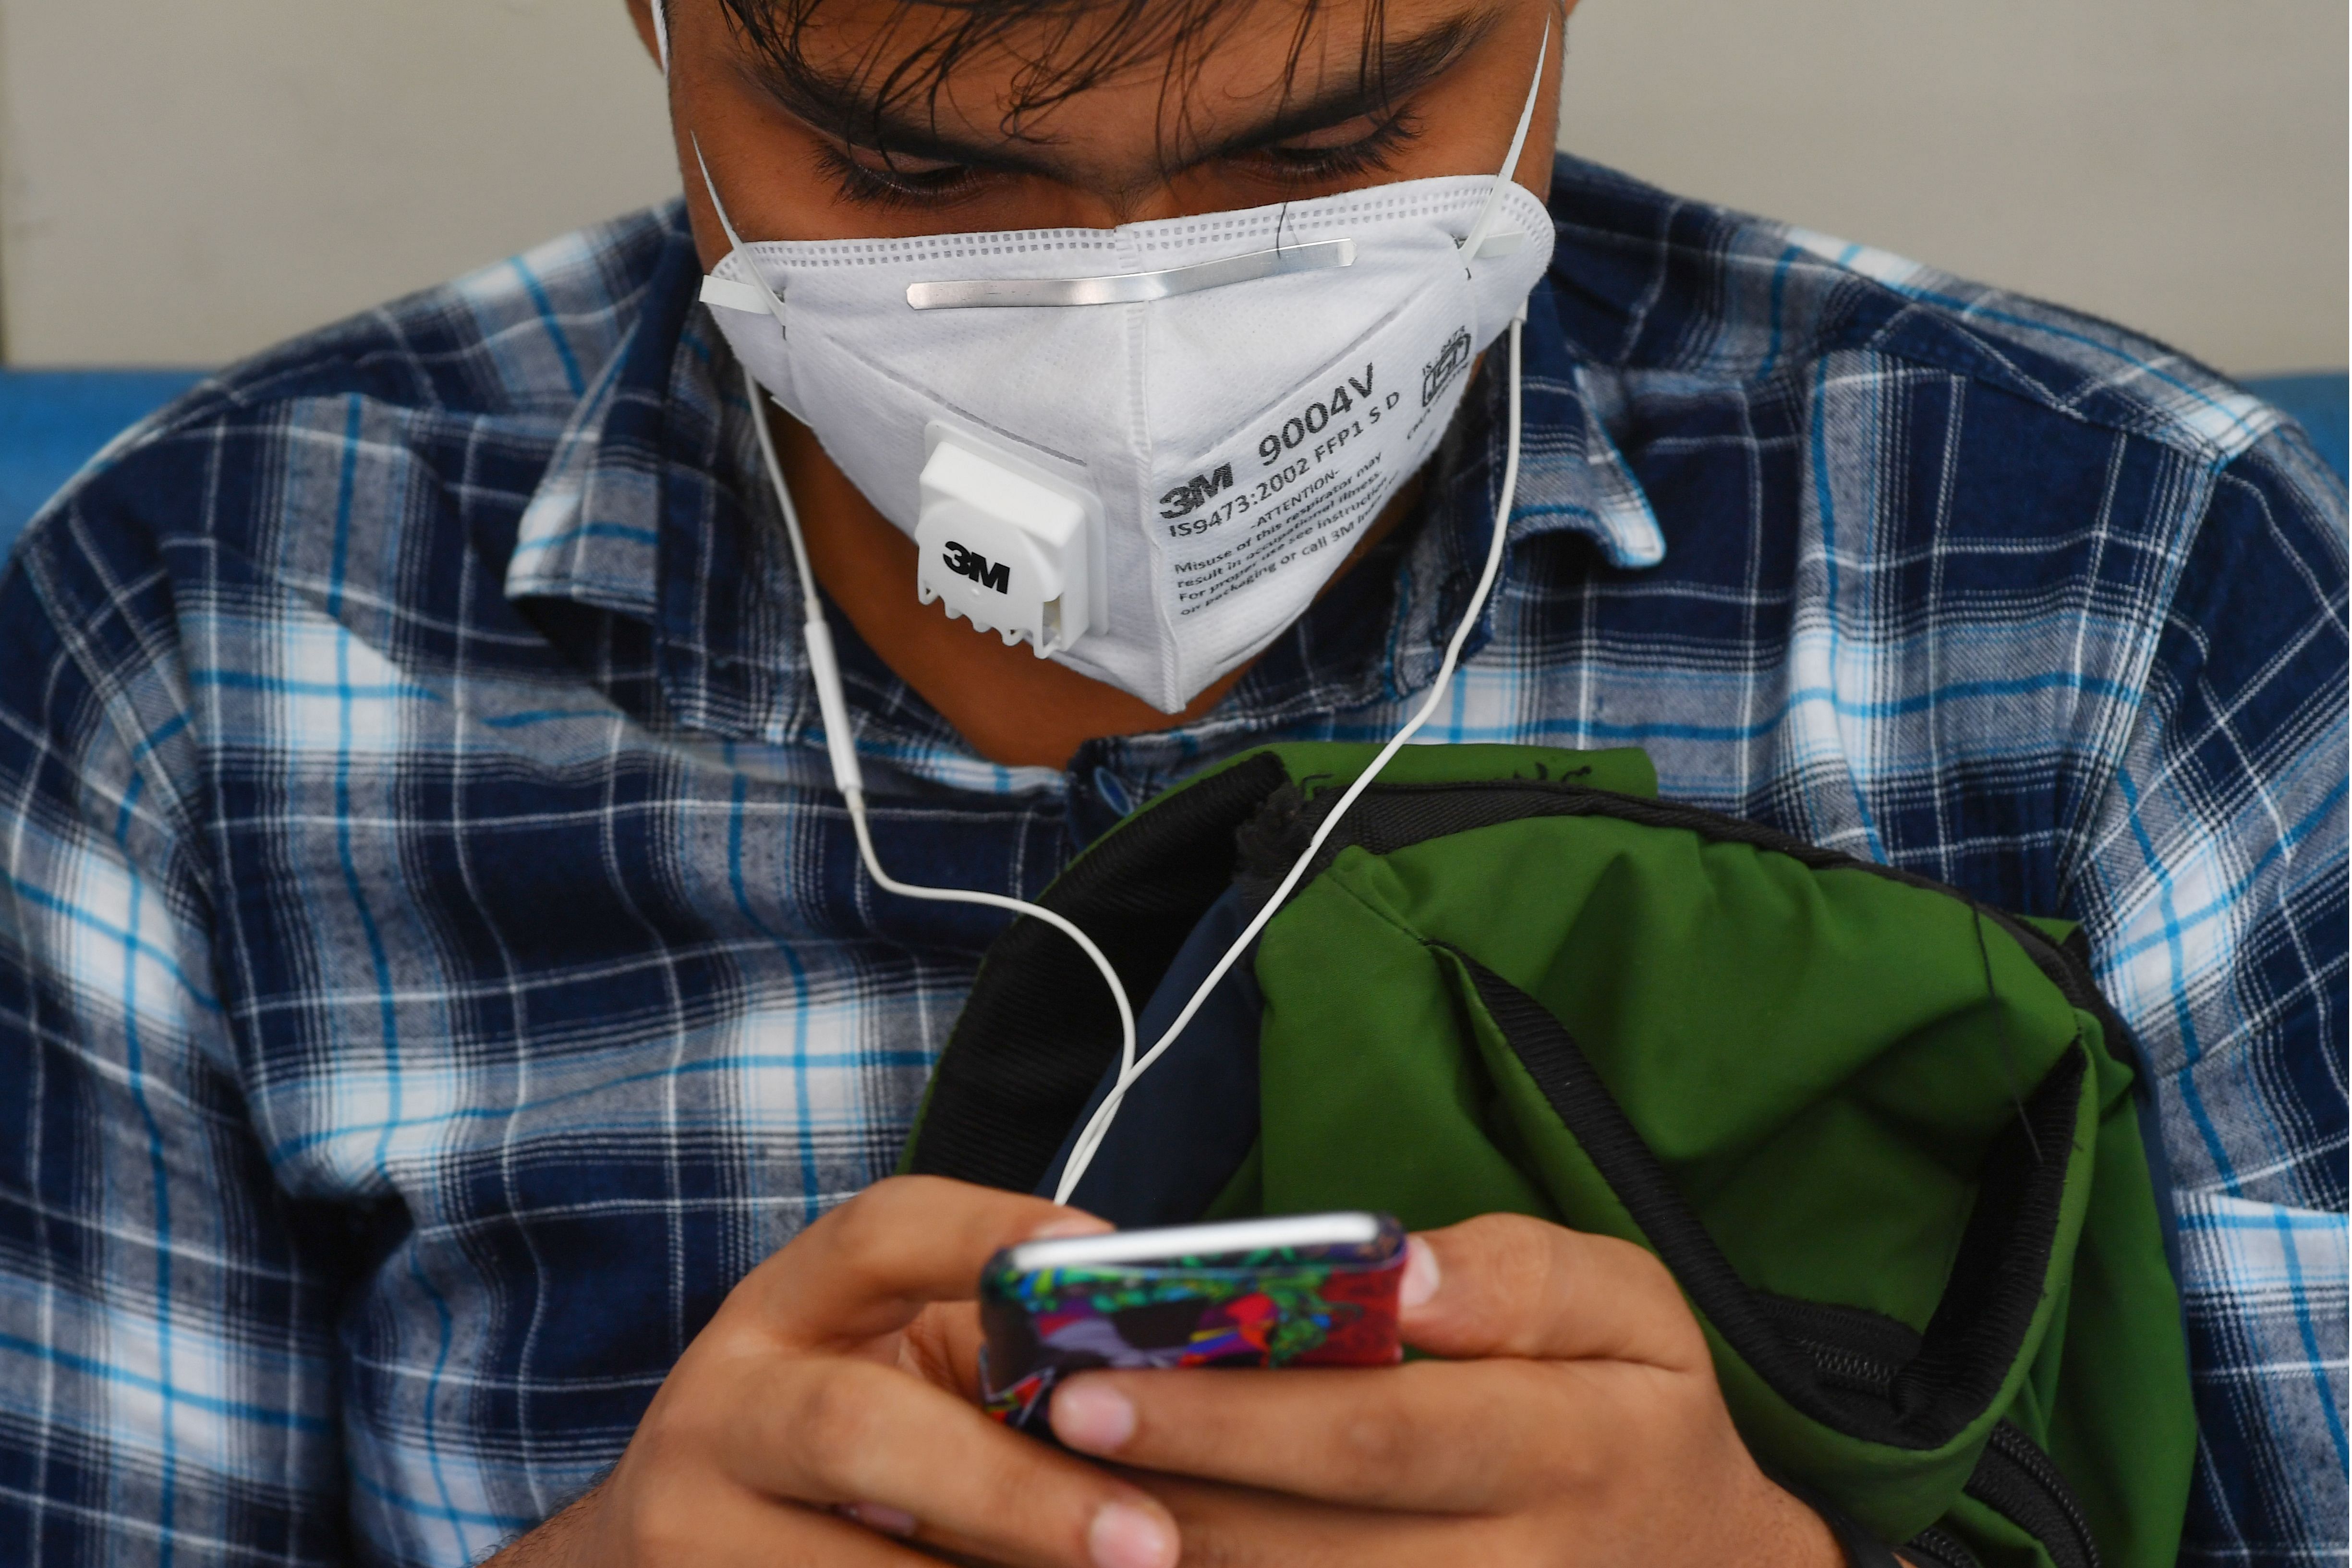 A man wearing a facemask amid concerns over the spread of the COVID-19 coronavirus uses his smart phone. (PTI)